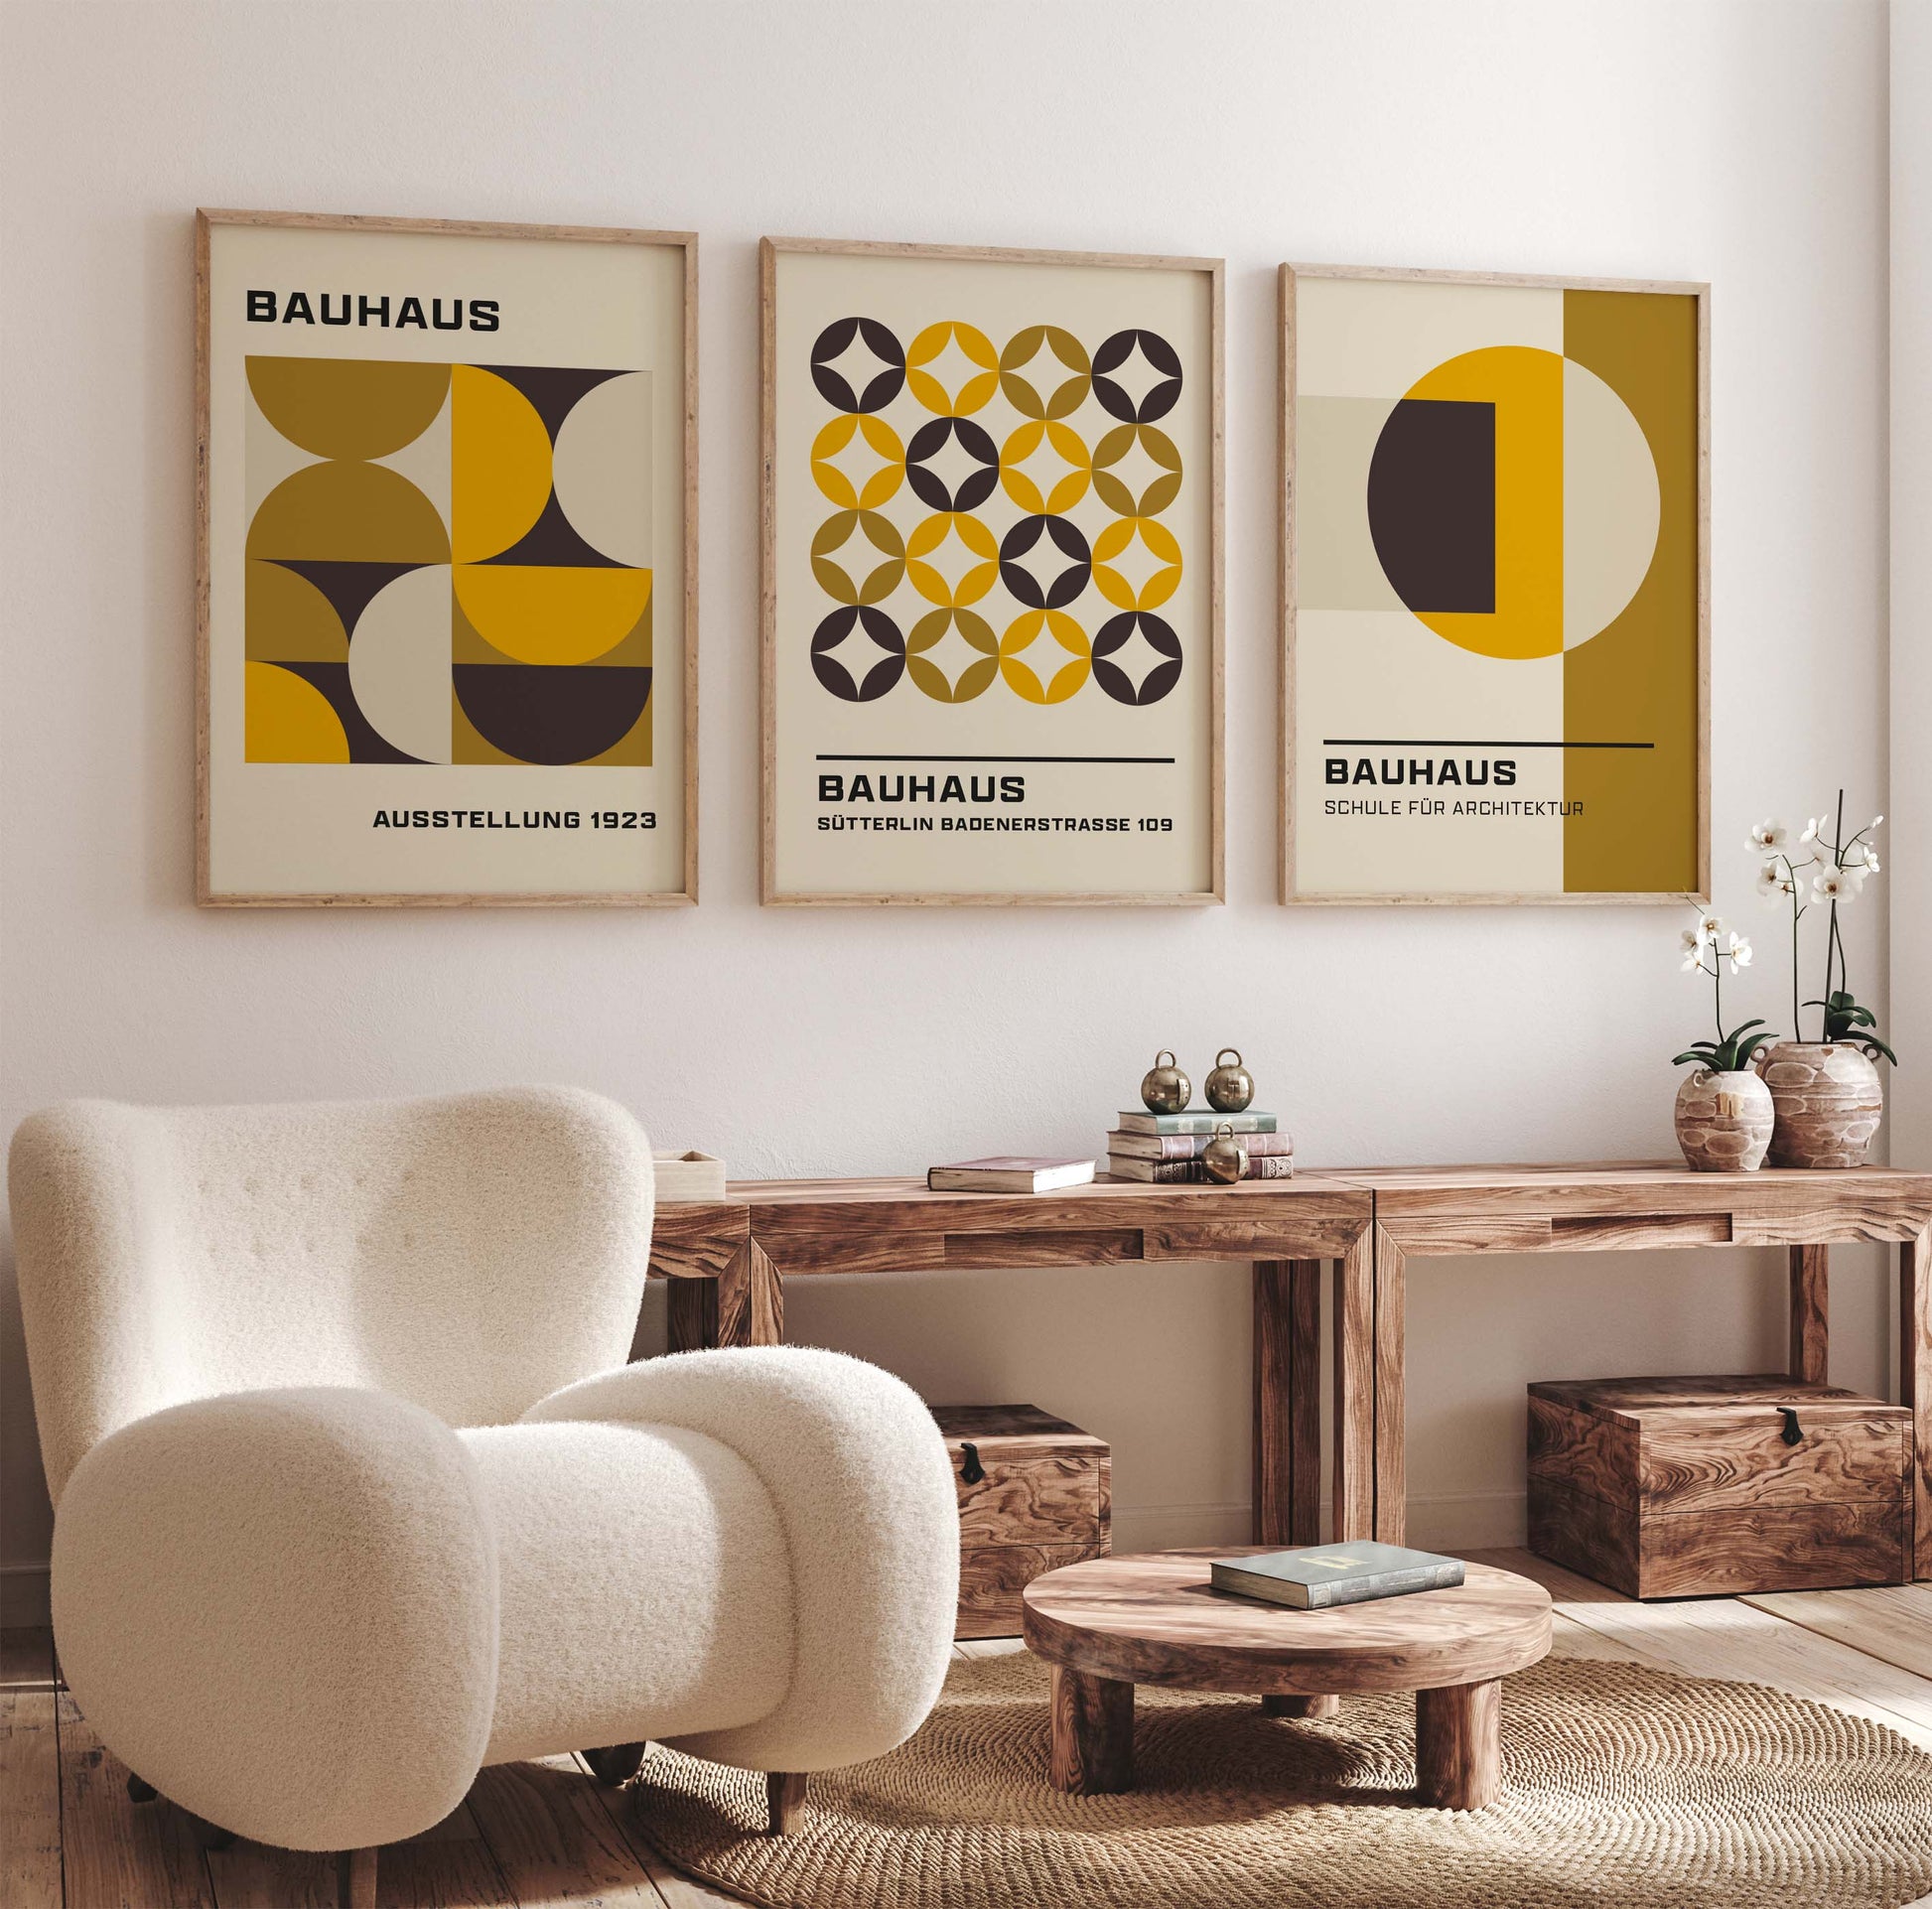 Set of 3 Bauhaus posters in yellow and mustard